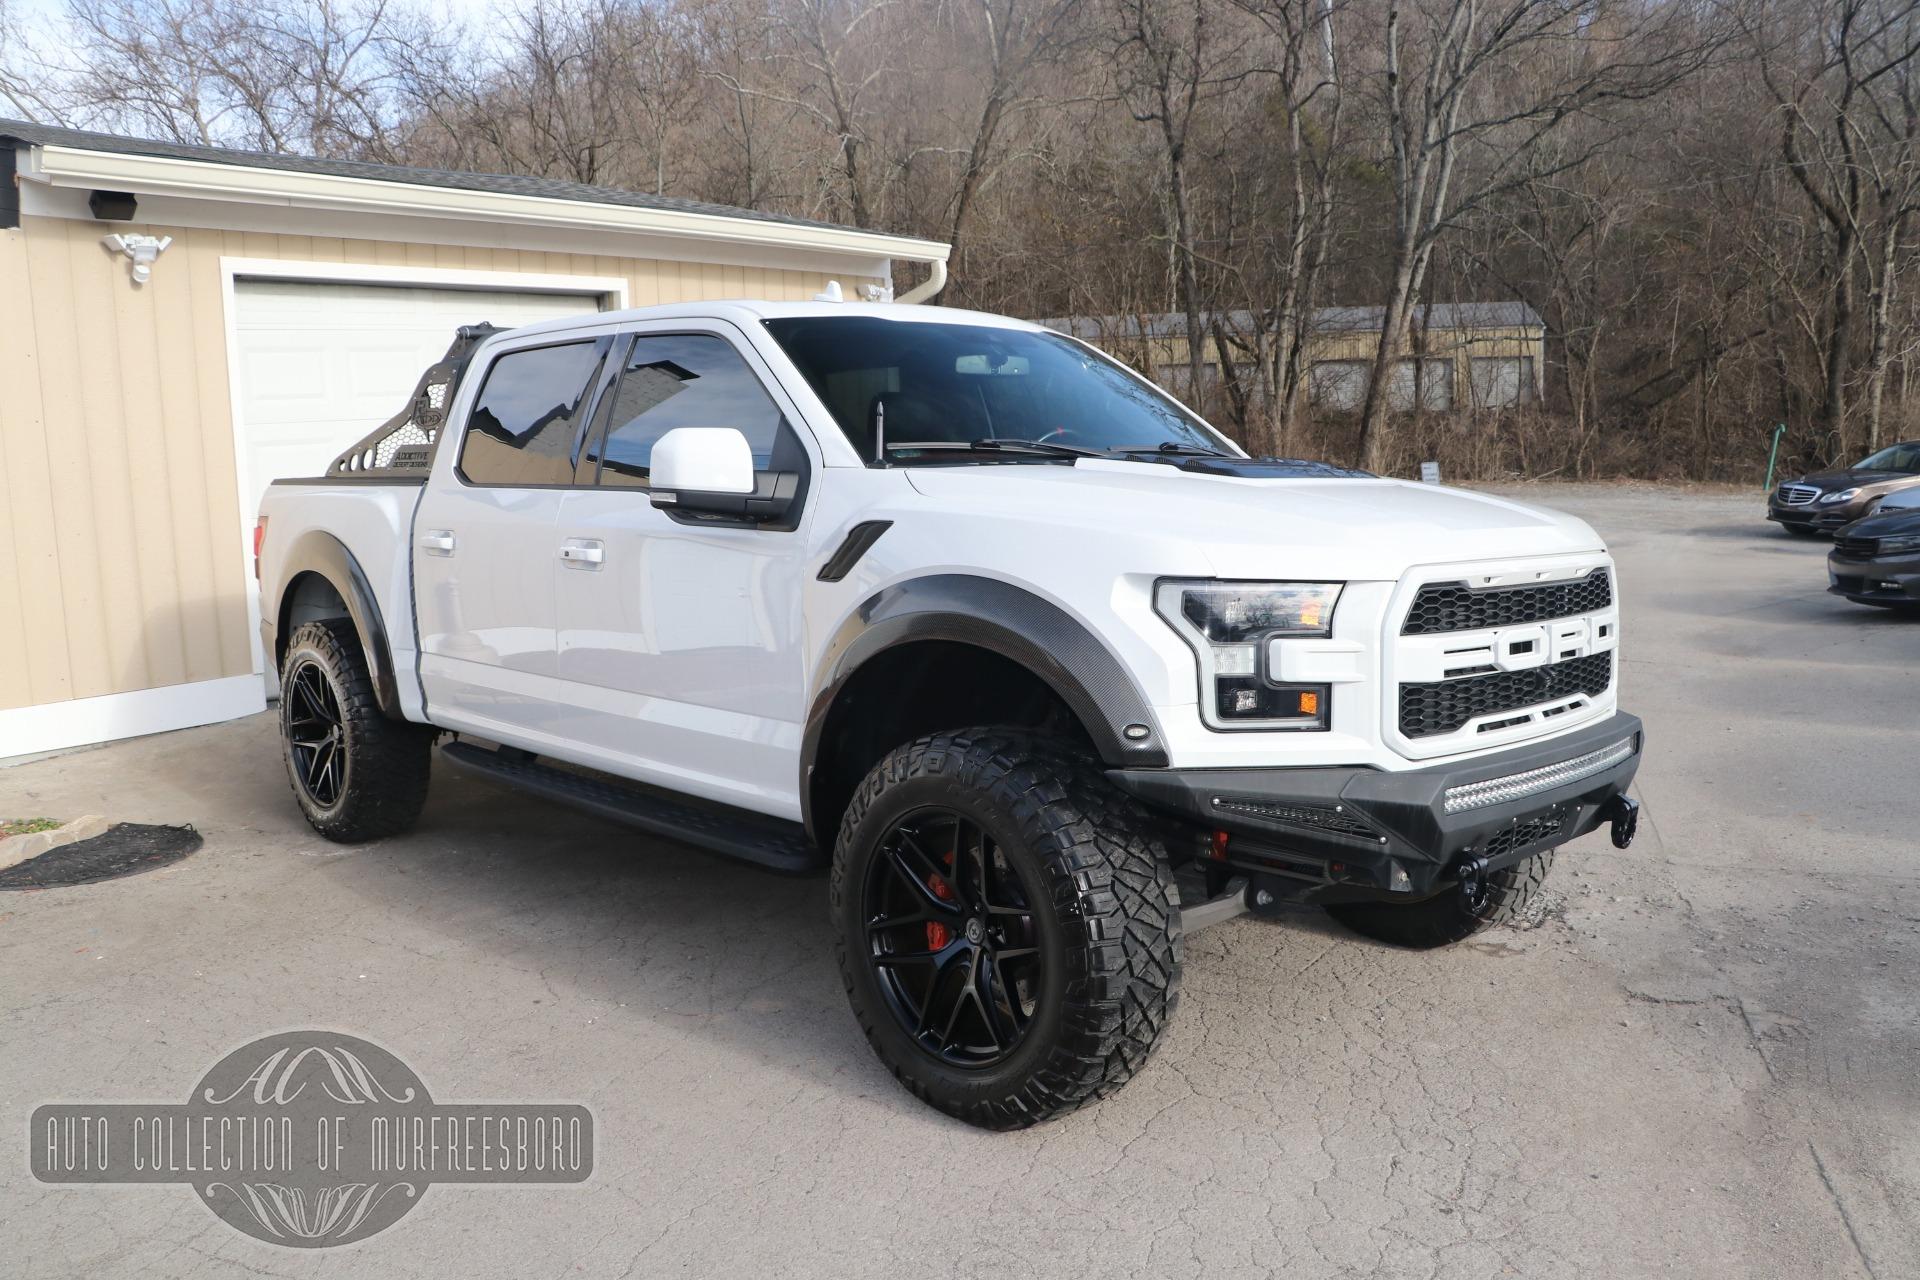 Used 2020 Ford F-150 RAPTOR SUPERCREW 4WD 5.5 Box Truck Over $50k for sale $84,900 at Auto Collection in Murfreesboro TN 37129 1